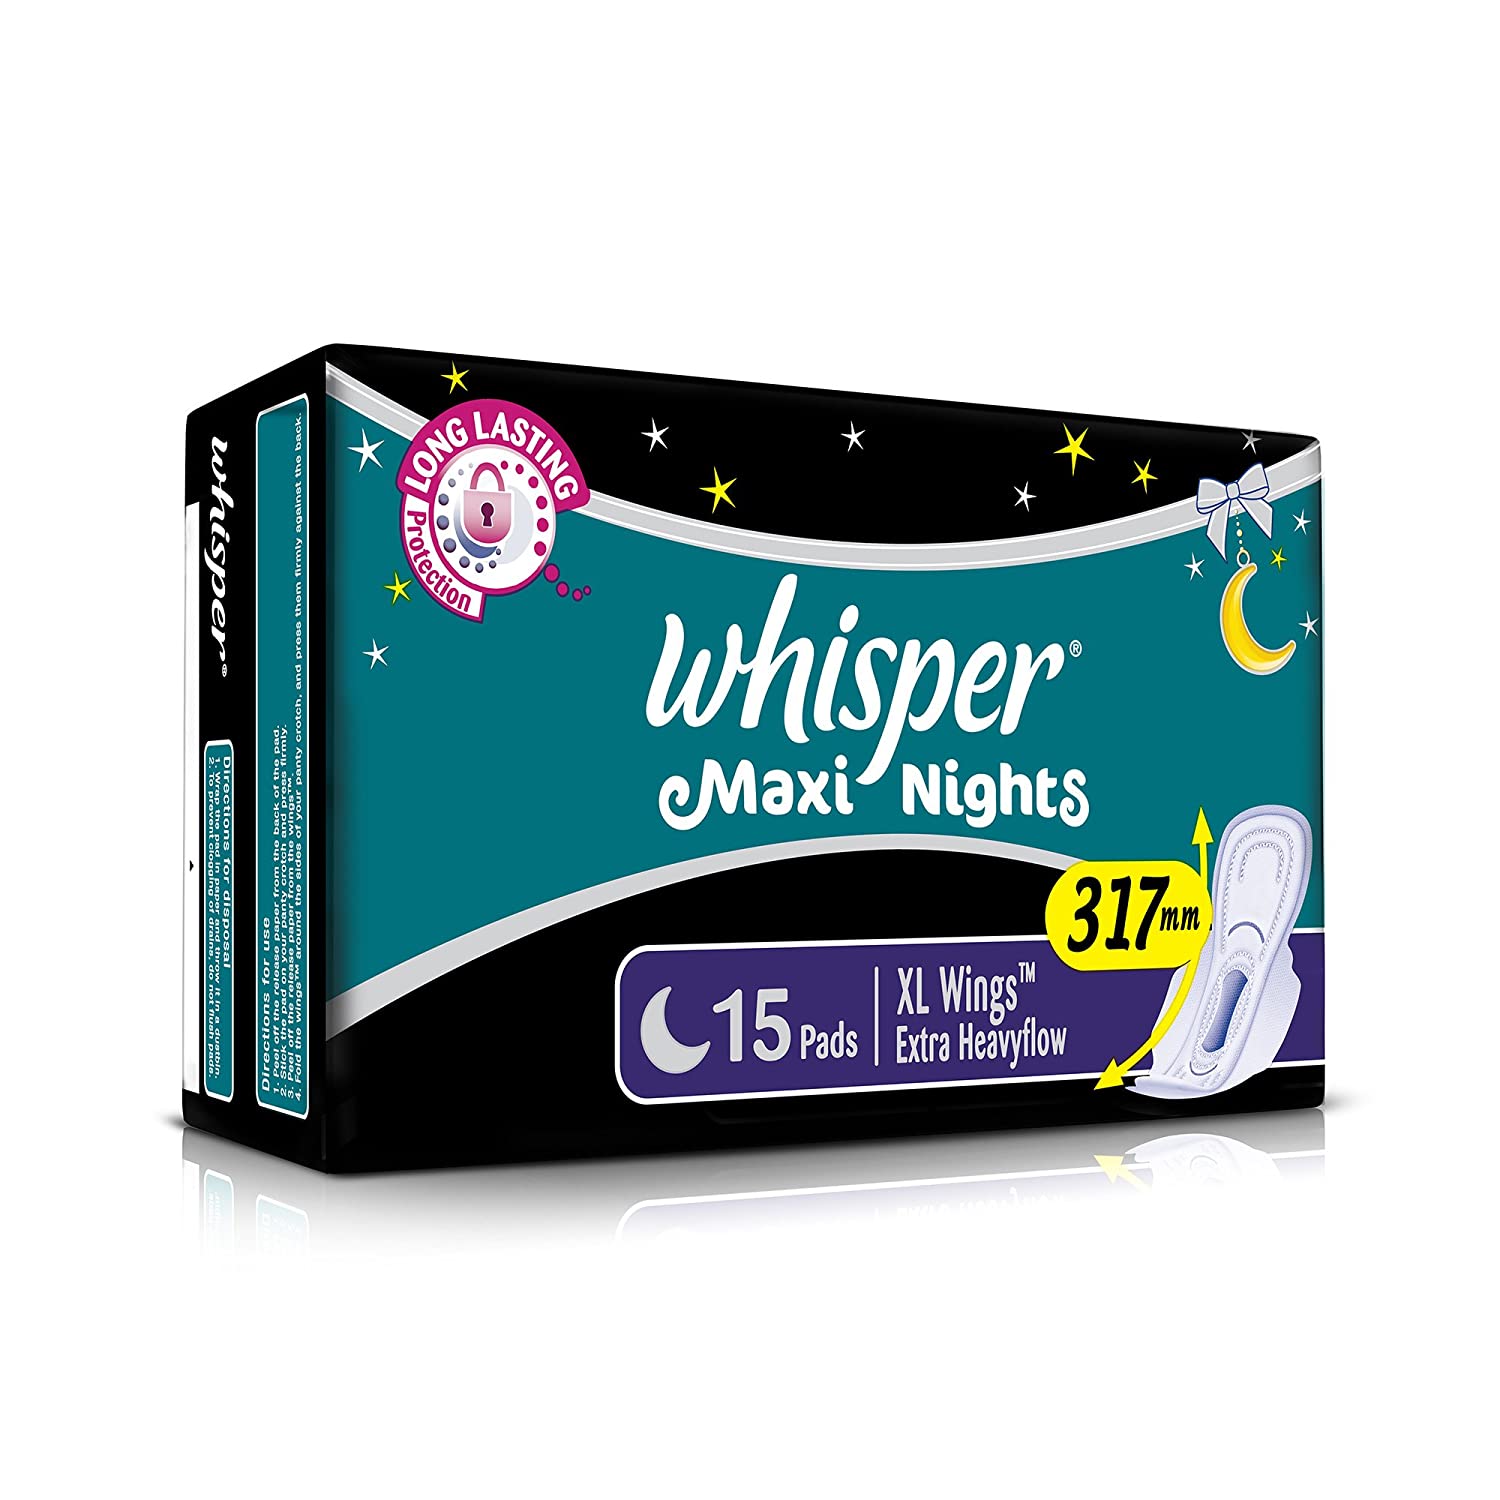 Whisper Maxi Nights Wings Heavy Flow Sanitary Pads for Women - XL